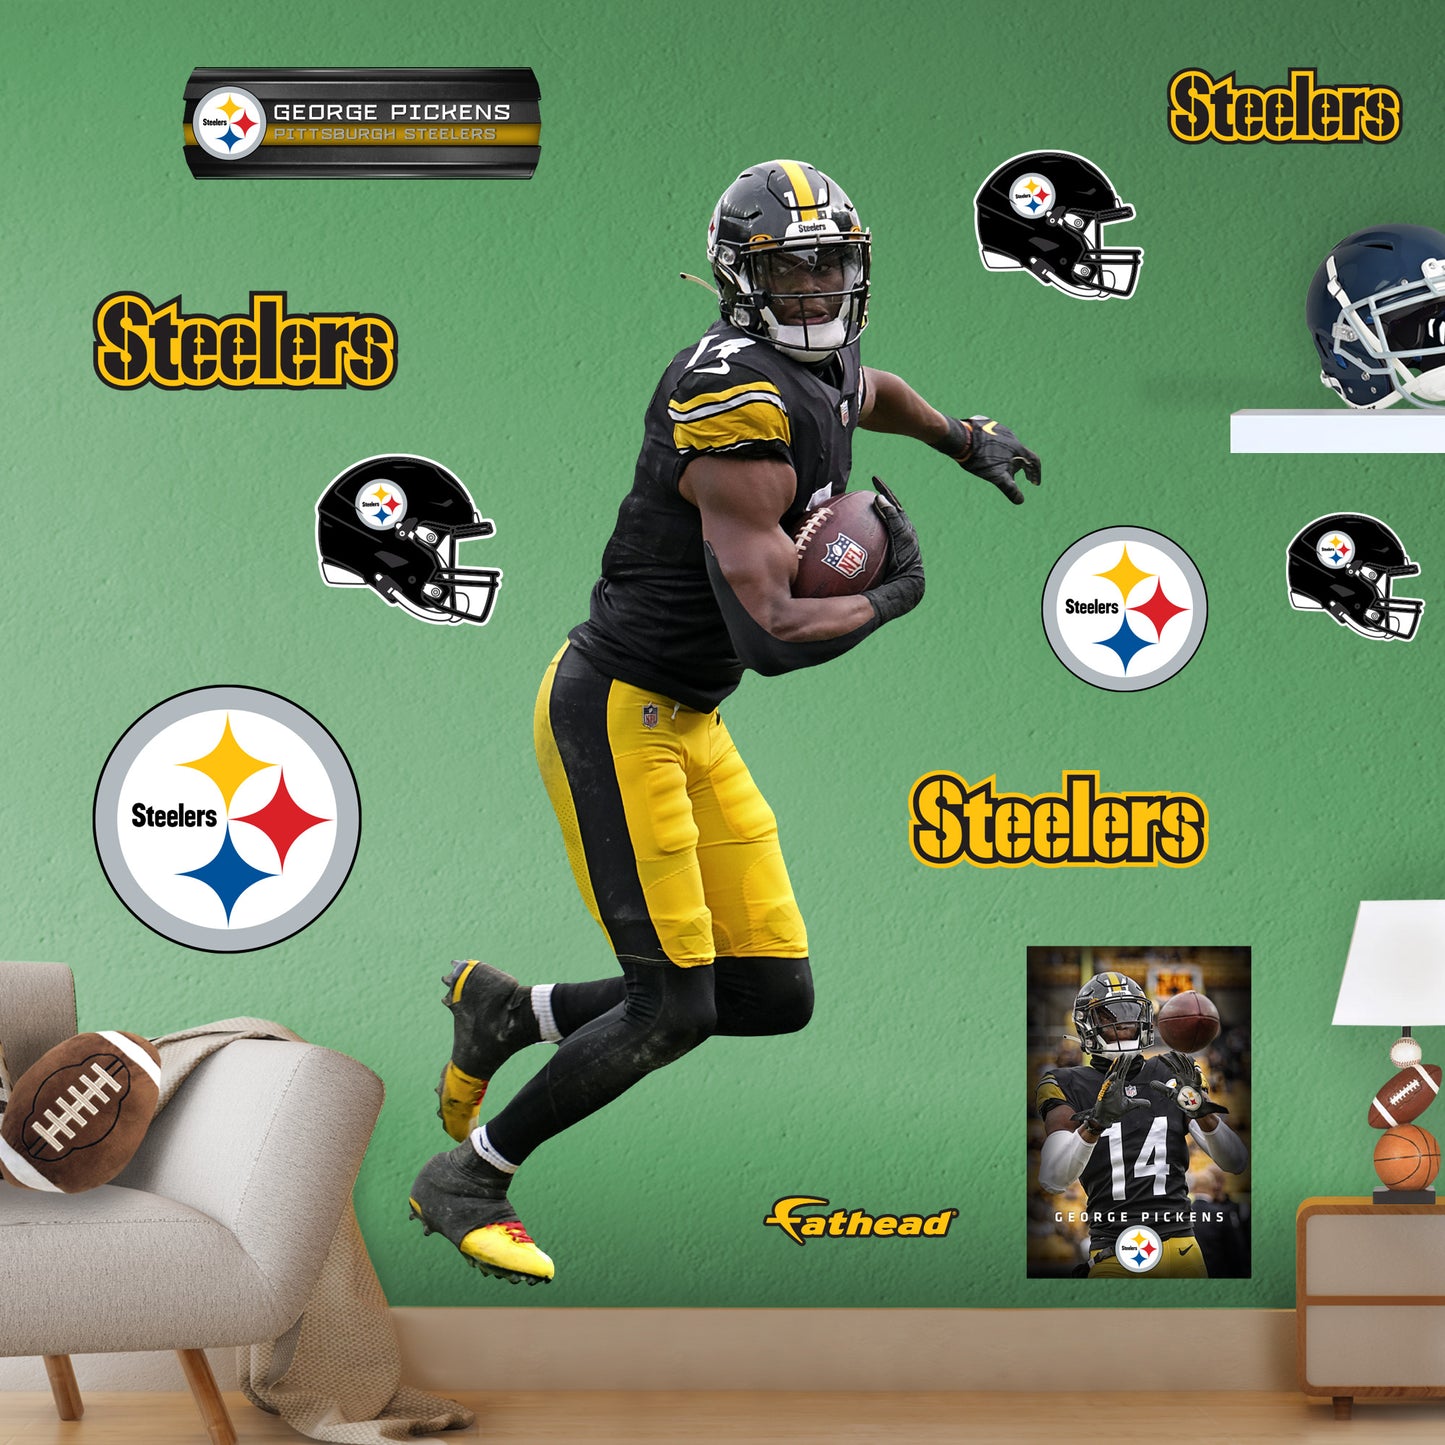 Pittsburgh Steelers: George Pickens 2022 - Officially Licensed NFL Rem –  Fathead